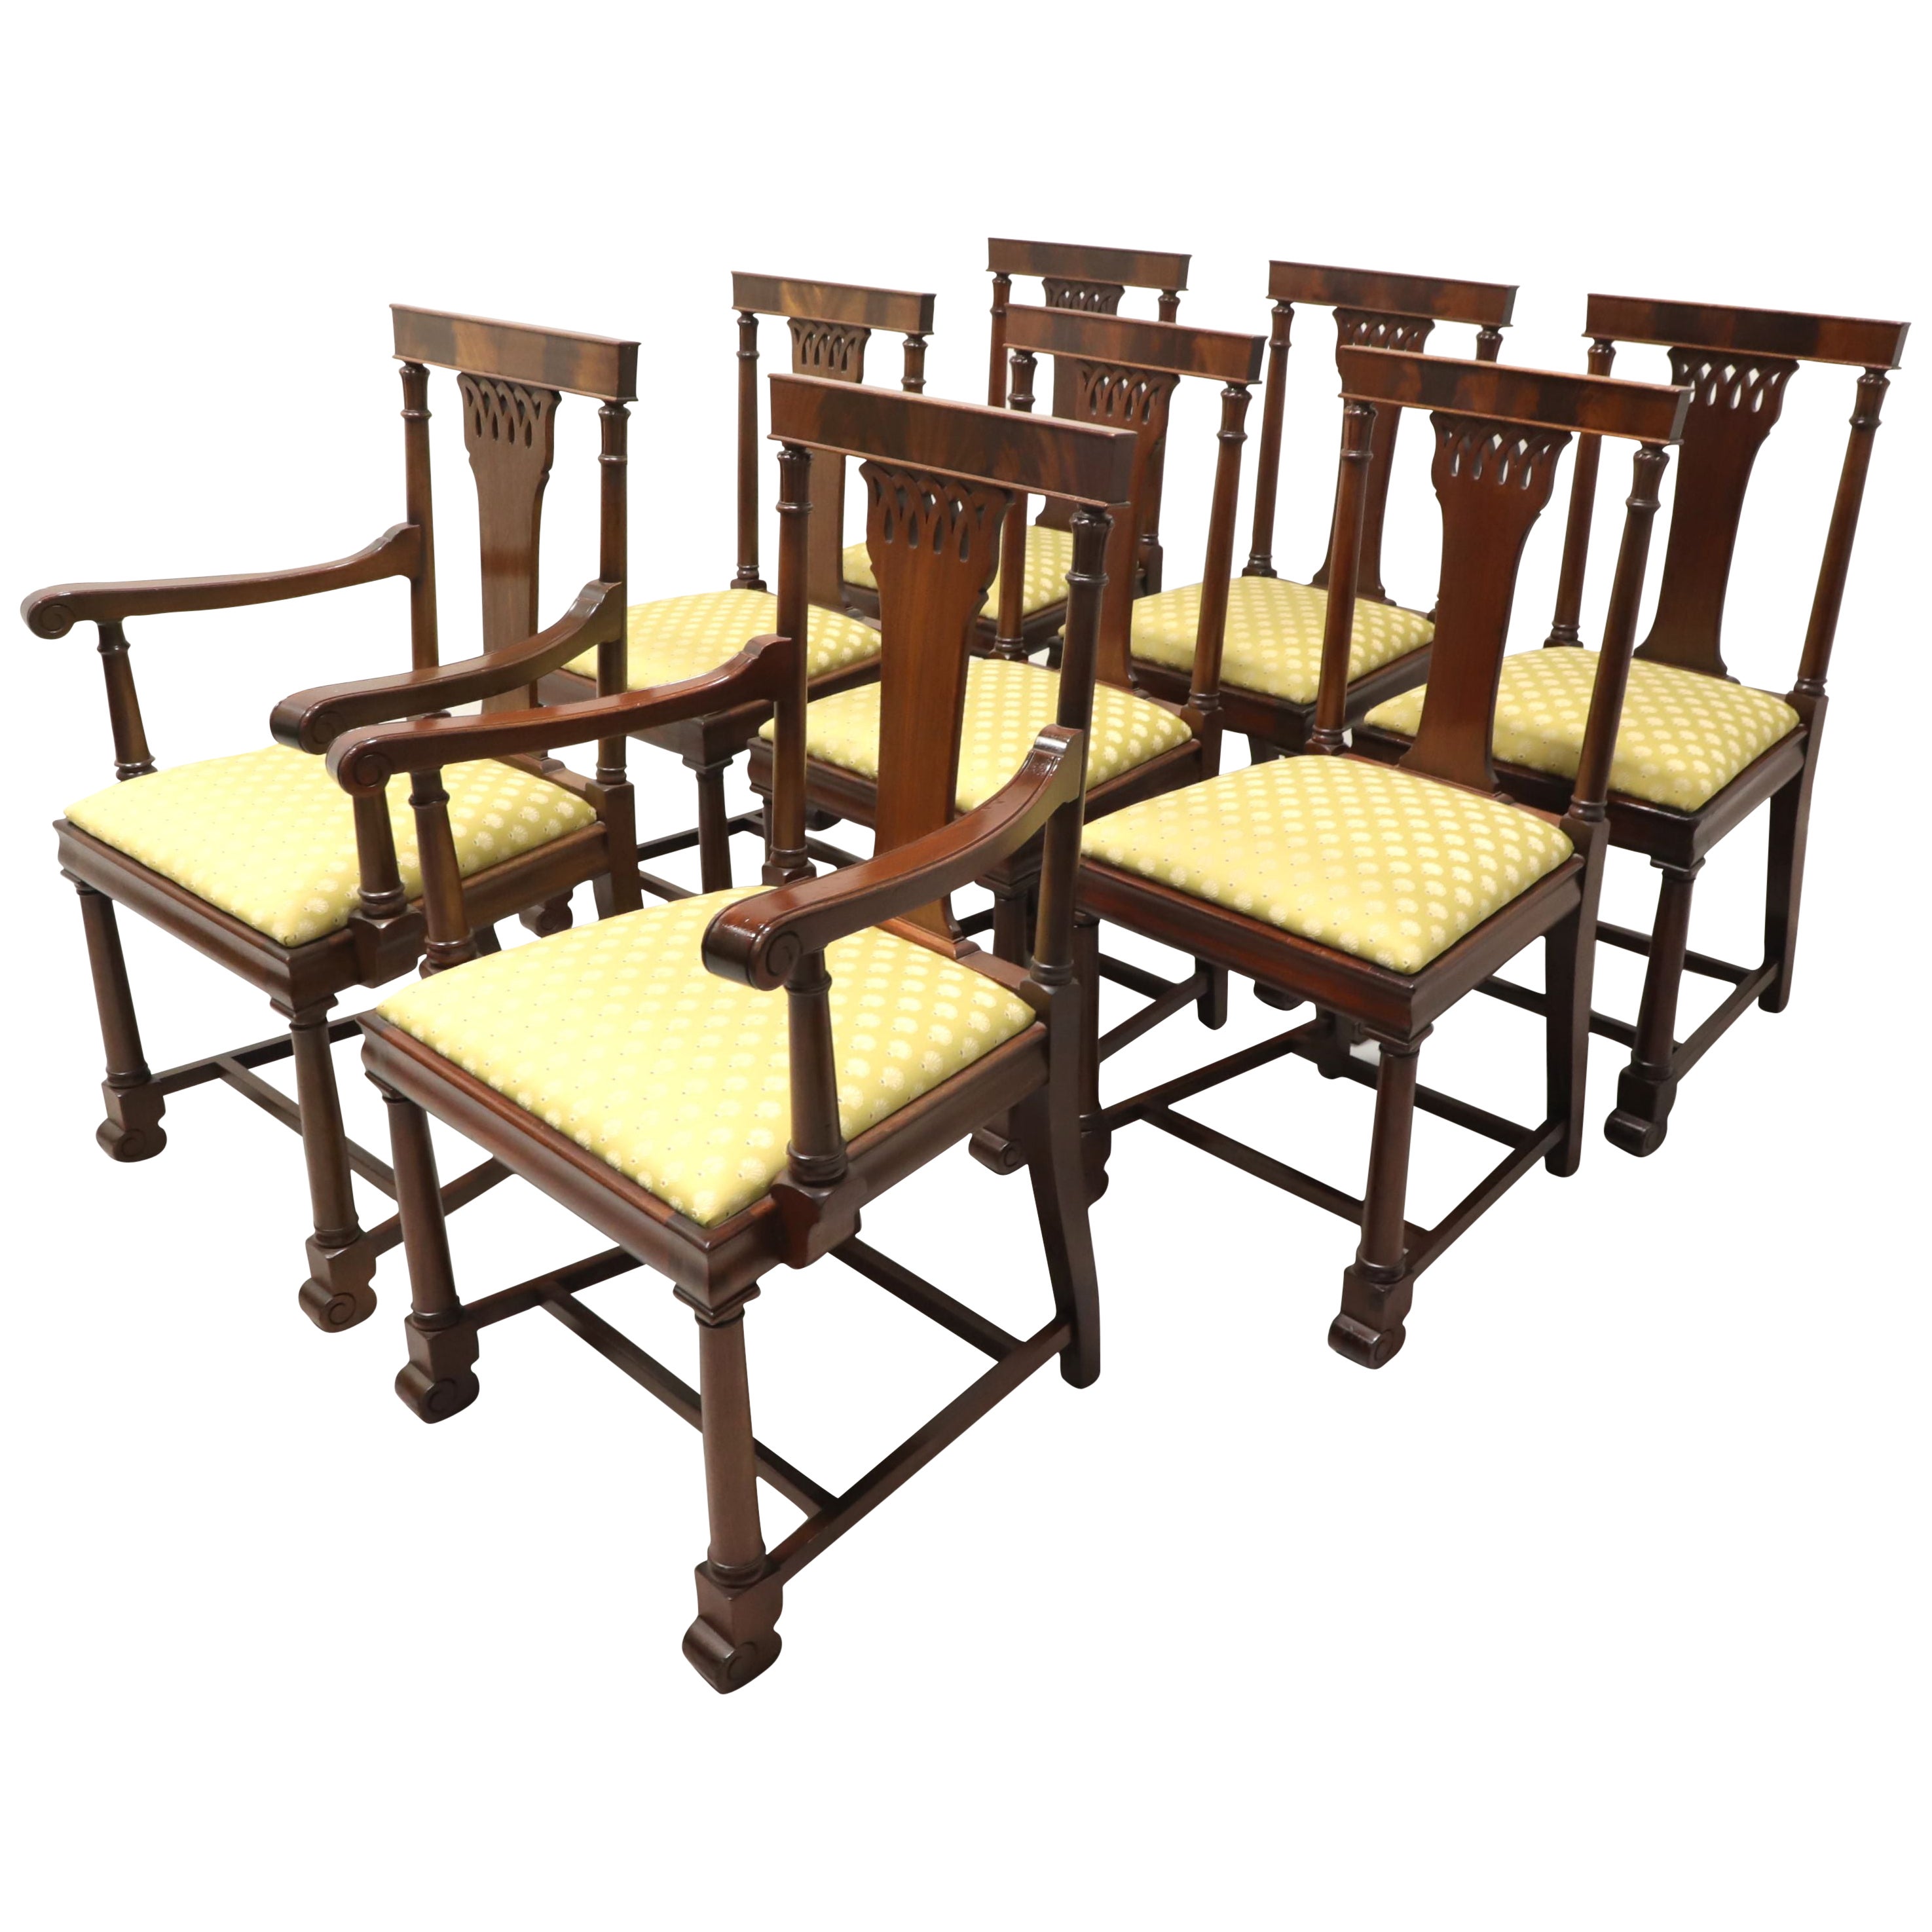 1940s Mahogany Empire Style Dining Chairs - Set of 8